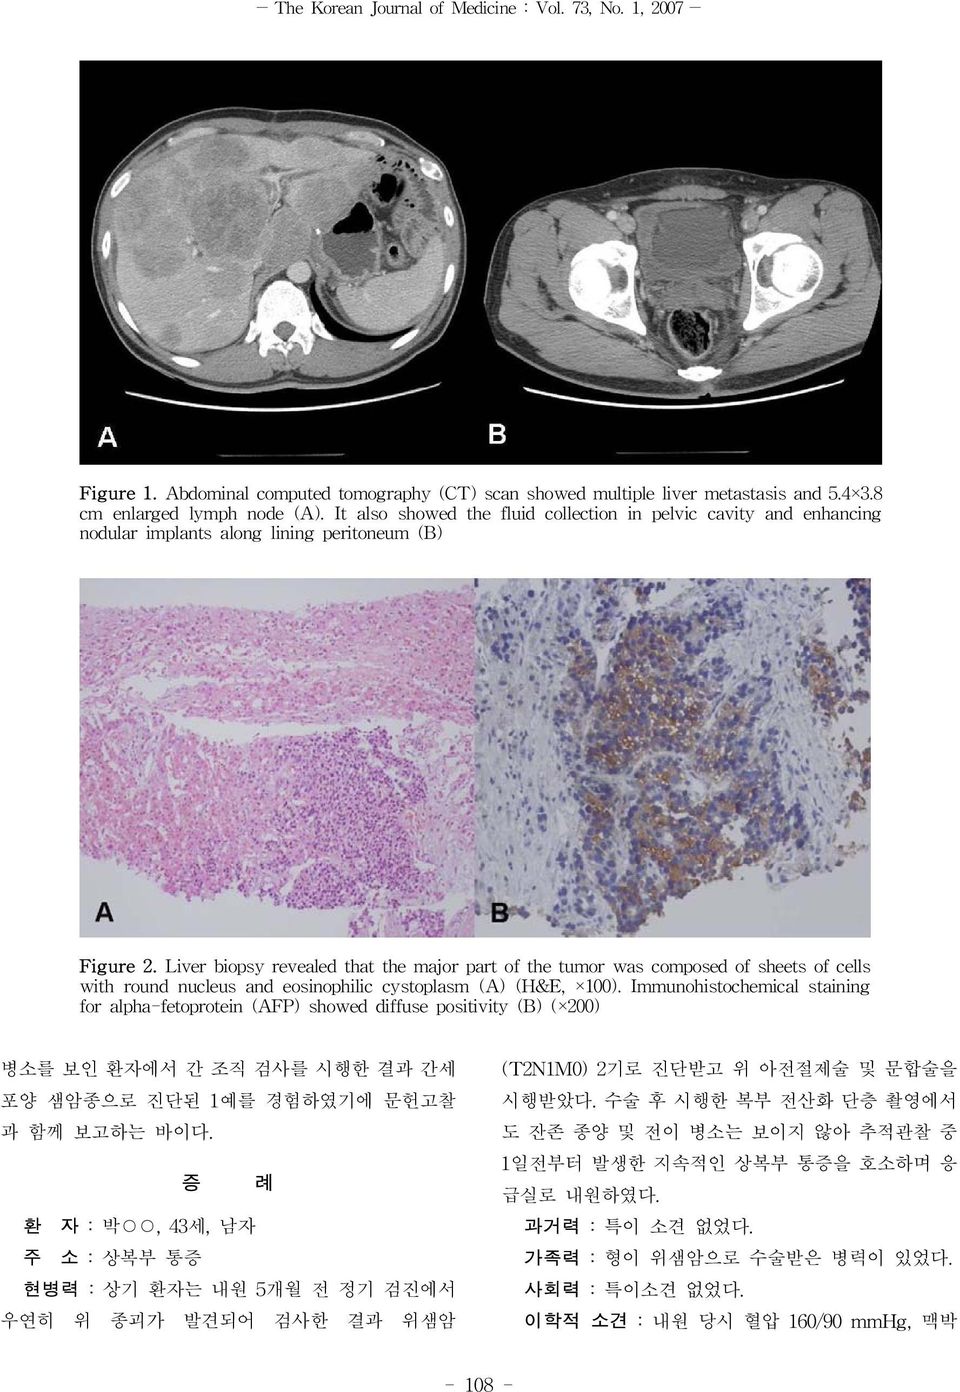 Liver biopsy revealed that the major part of the tumor was composed of sheets of cells with round nucleus and eosinophilic cystoplasm (A) (H&E, 100).